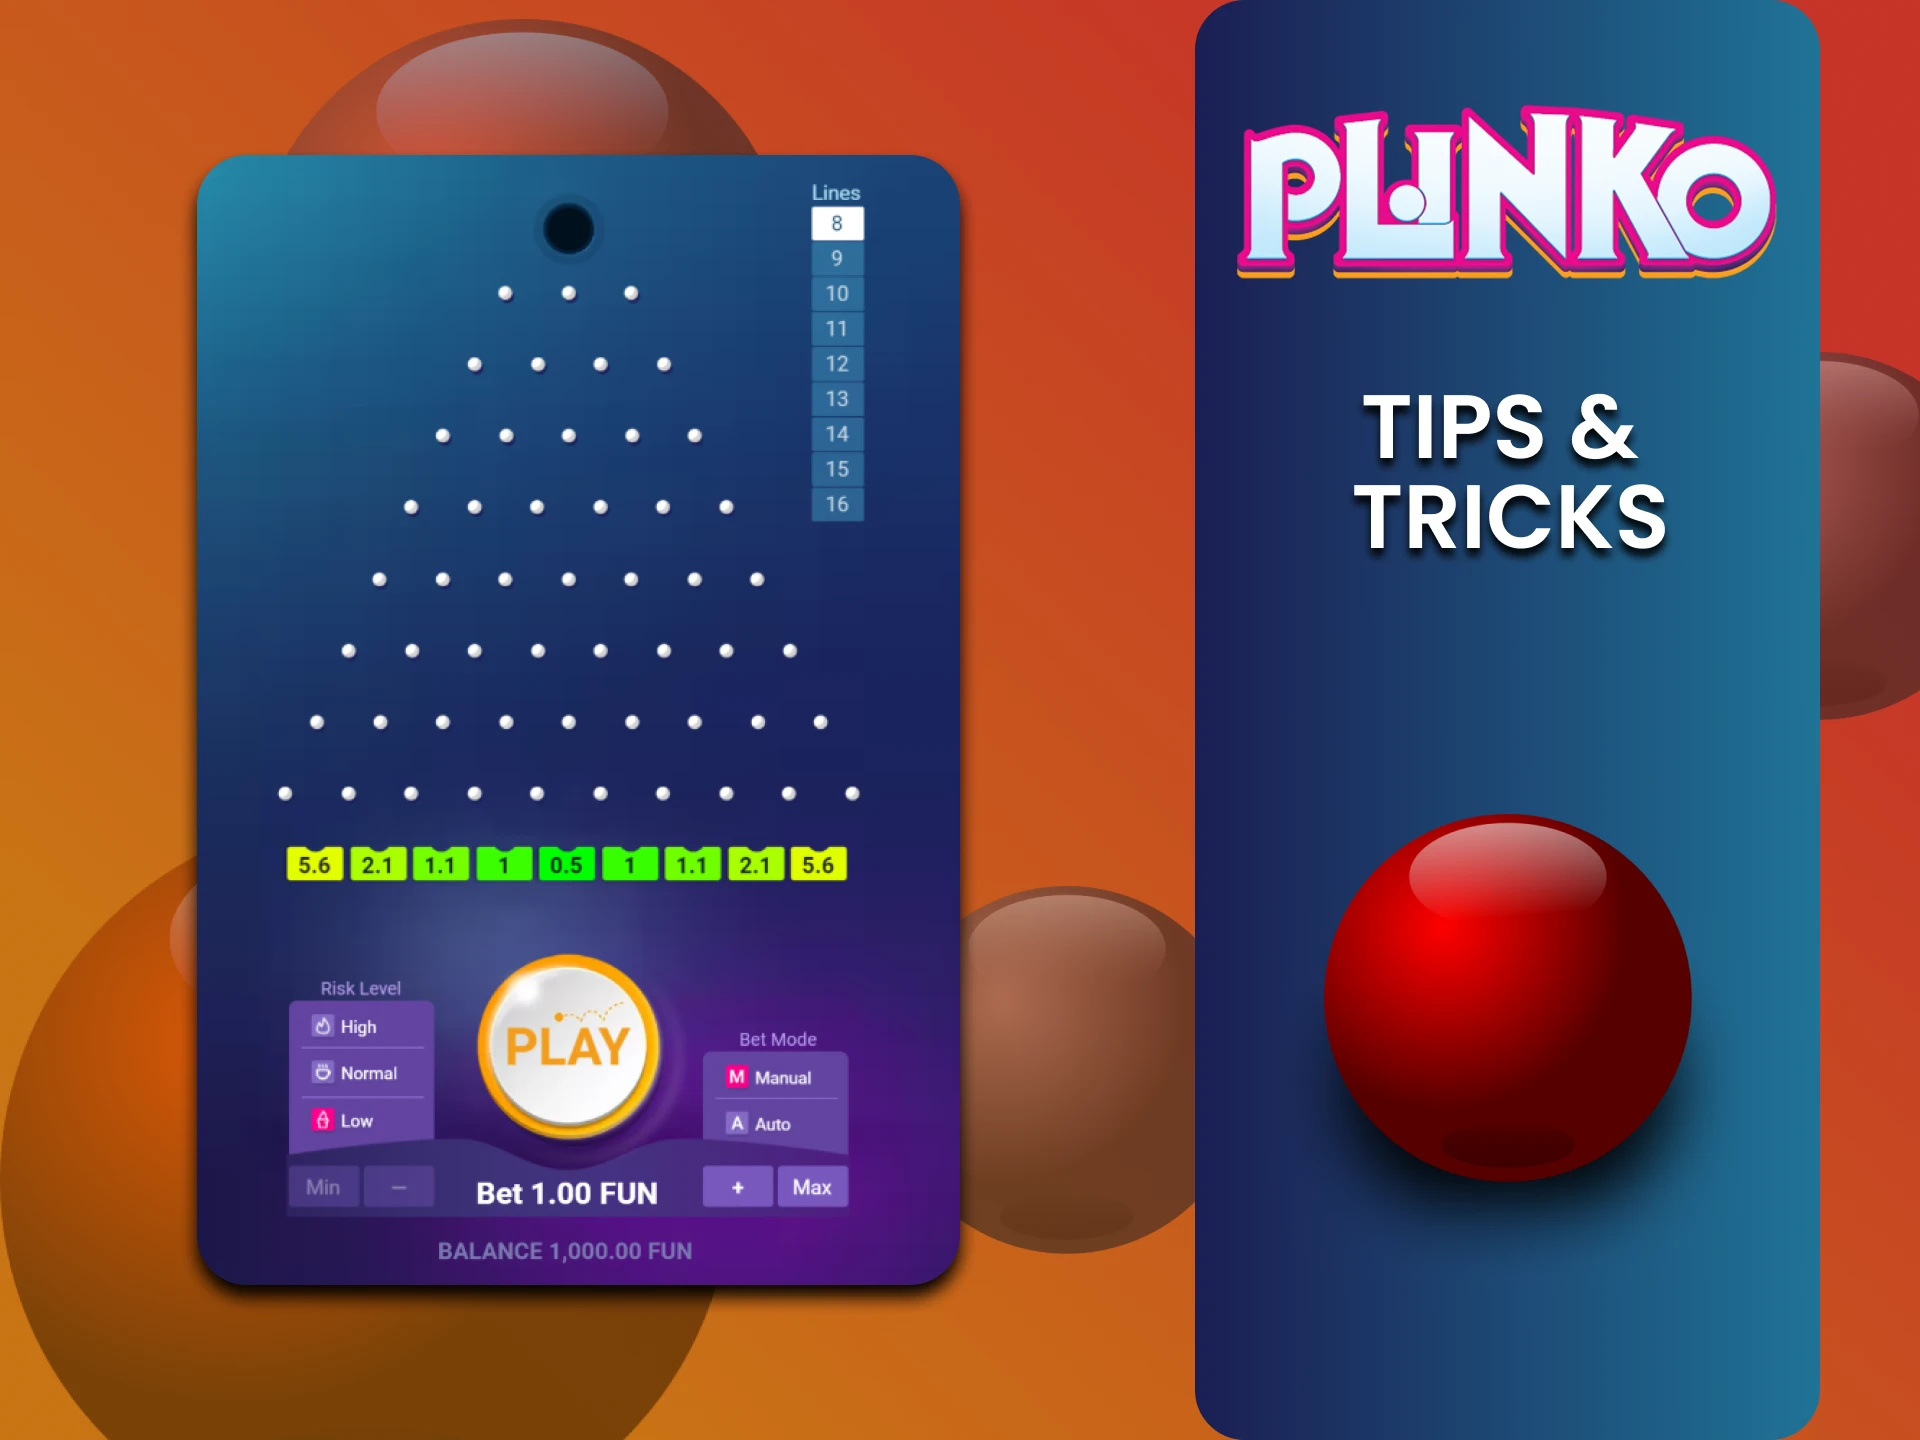 We will tell you about the tricks for winning in Plinko.